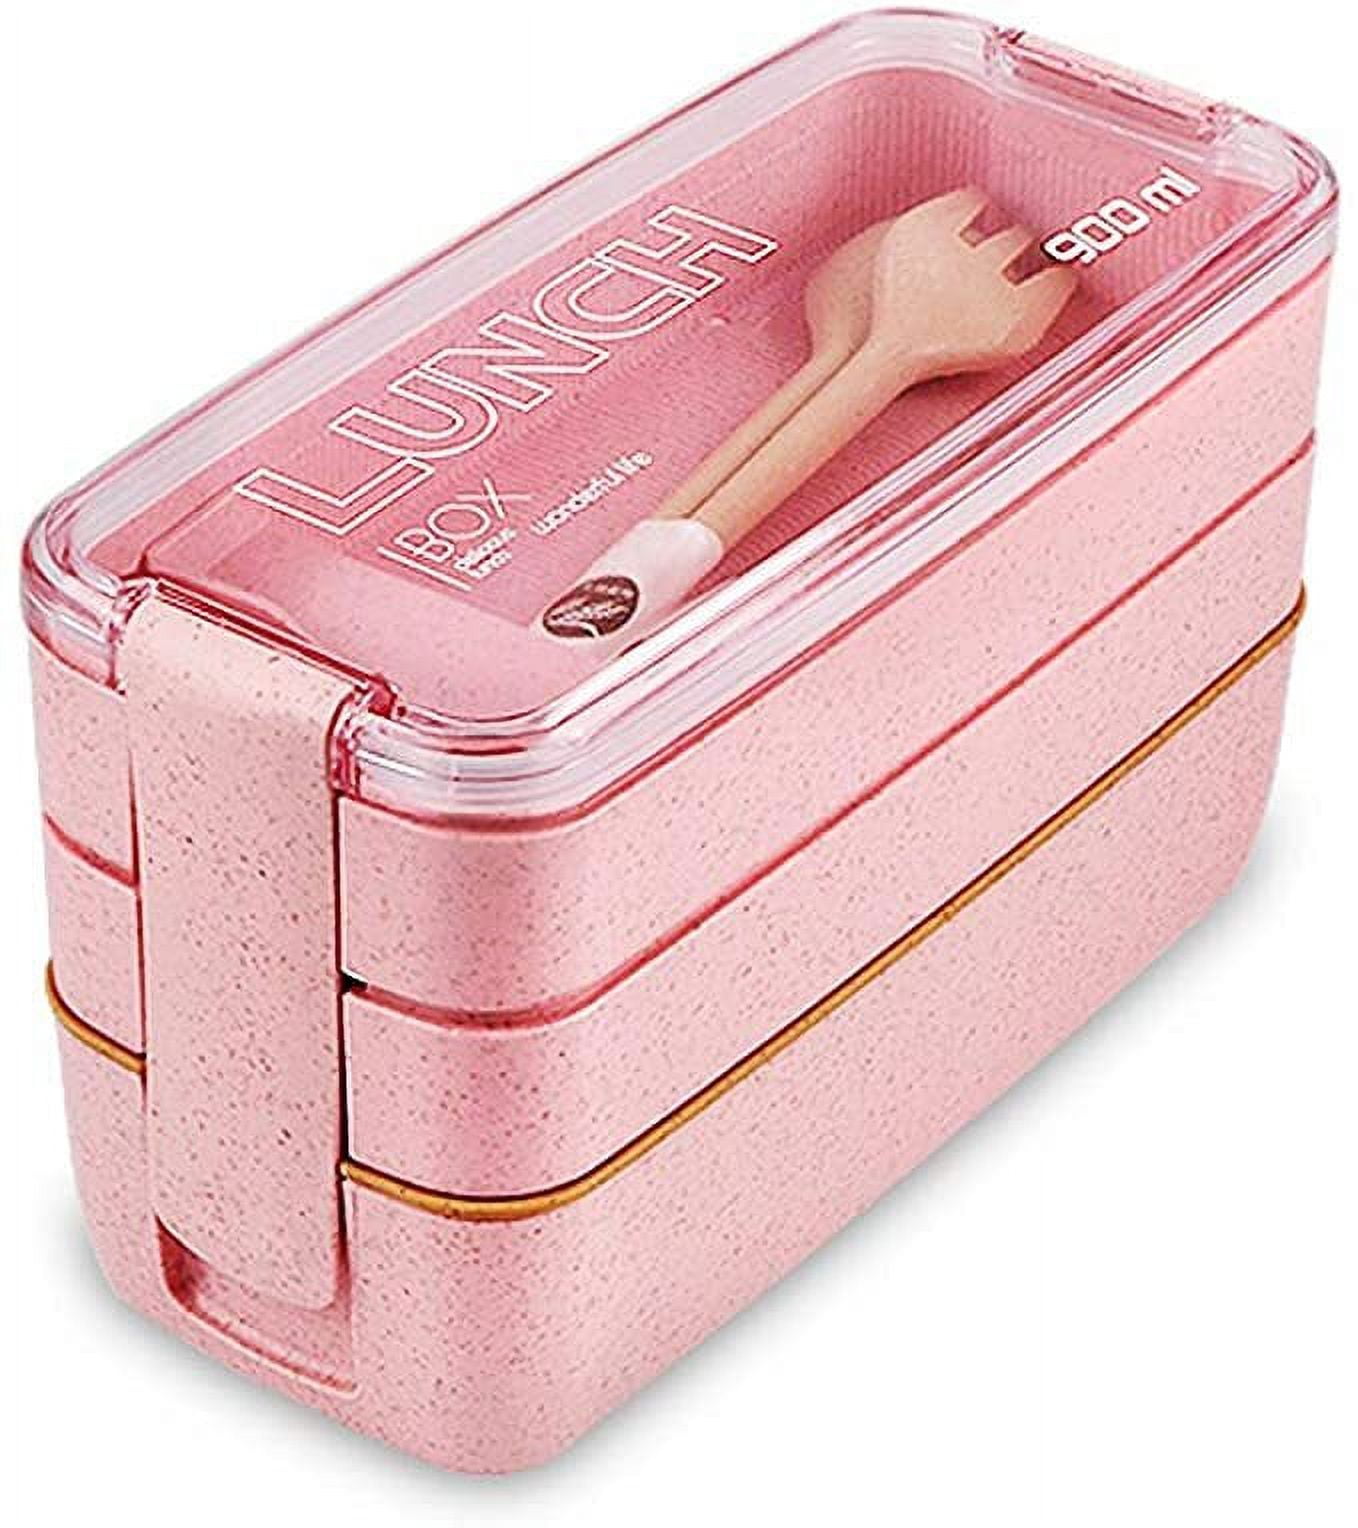 Bento Box Adult Lunch Box with lunch bag, Japanese Lunch Box Containers for  Adult, Bento lunch Box with Leakproof pink